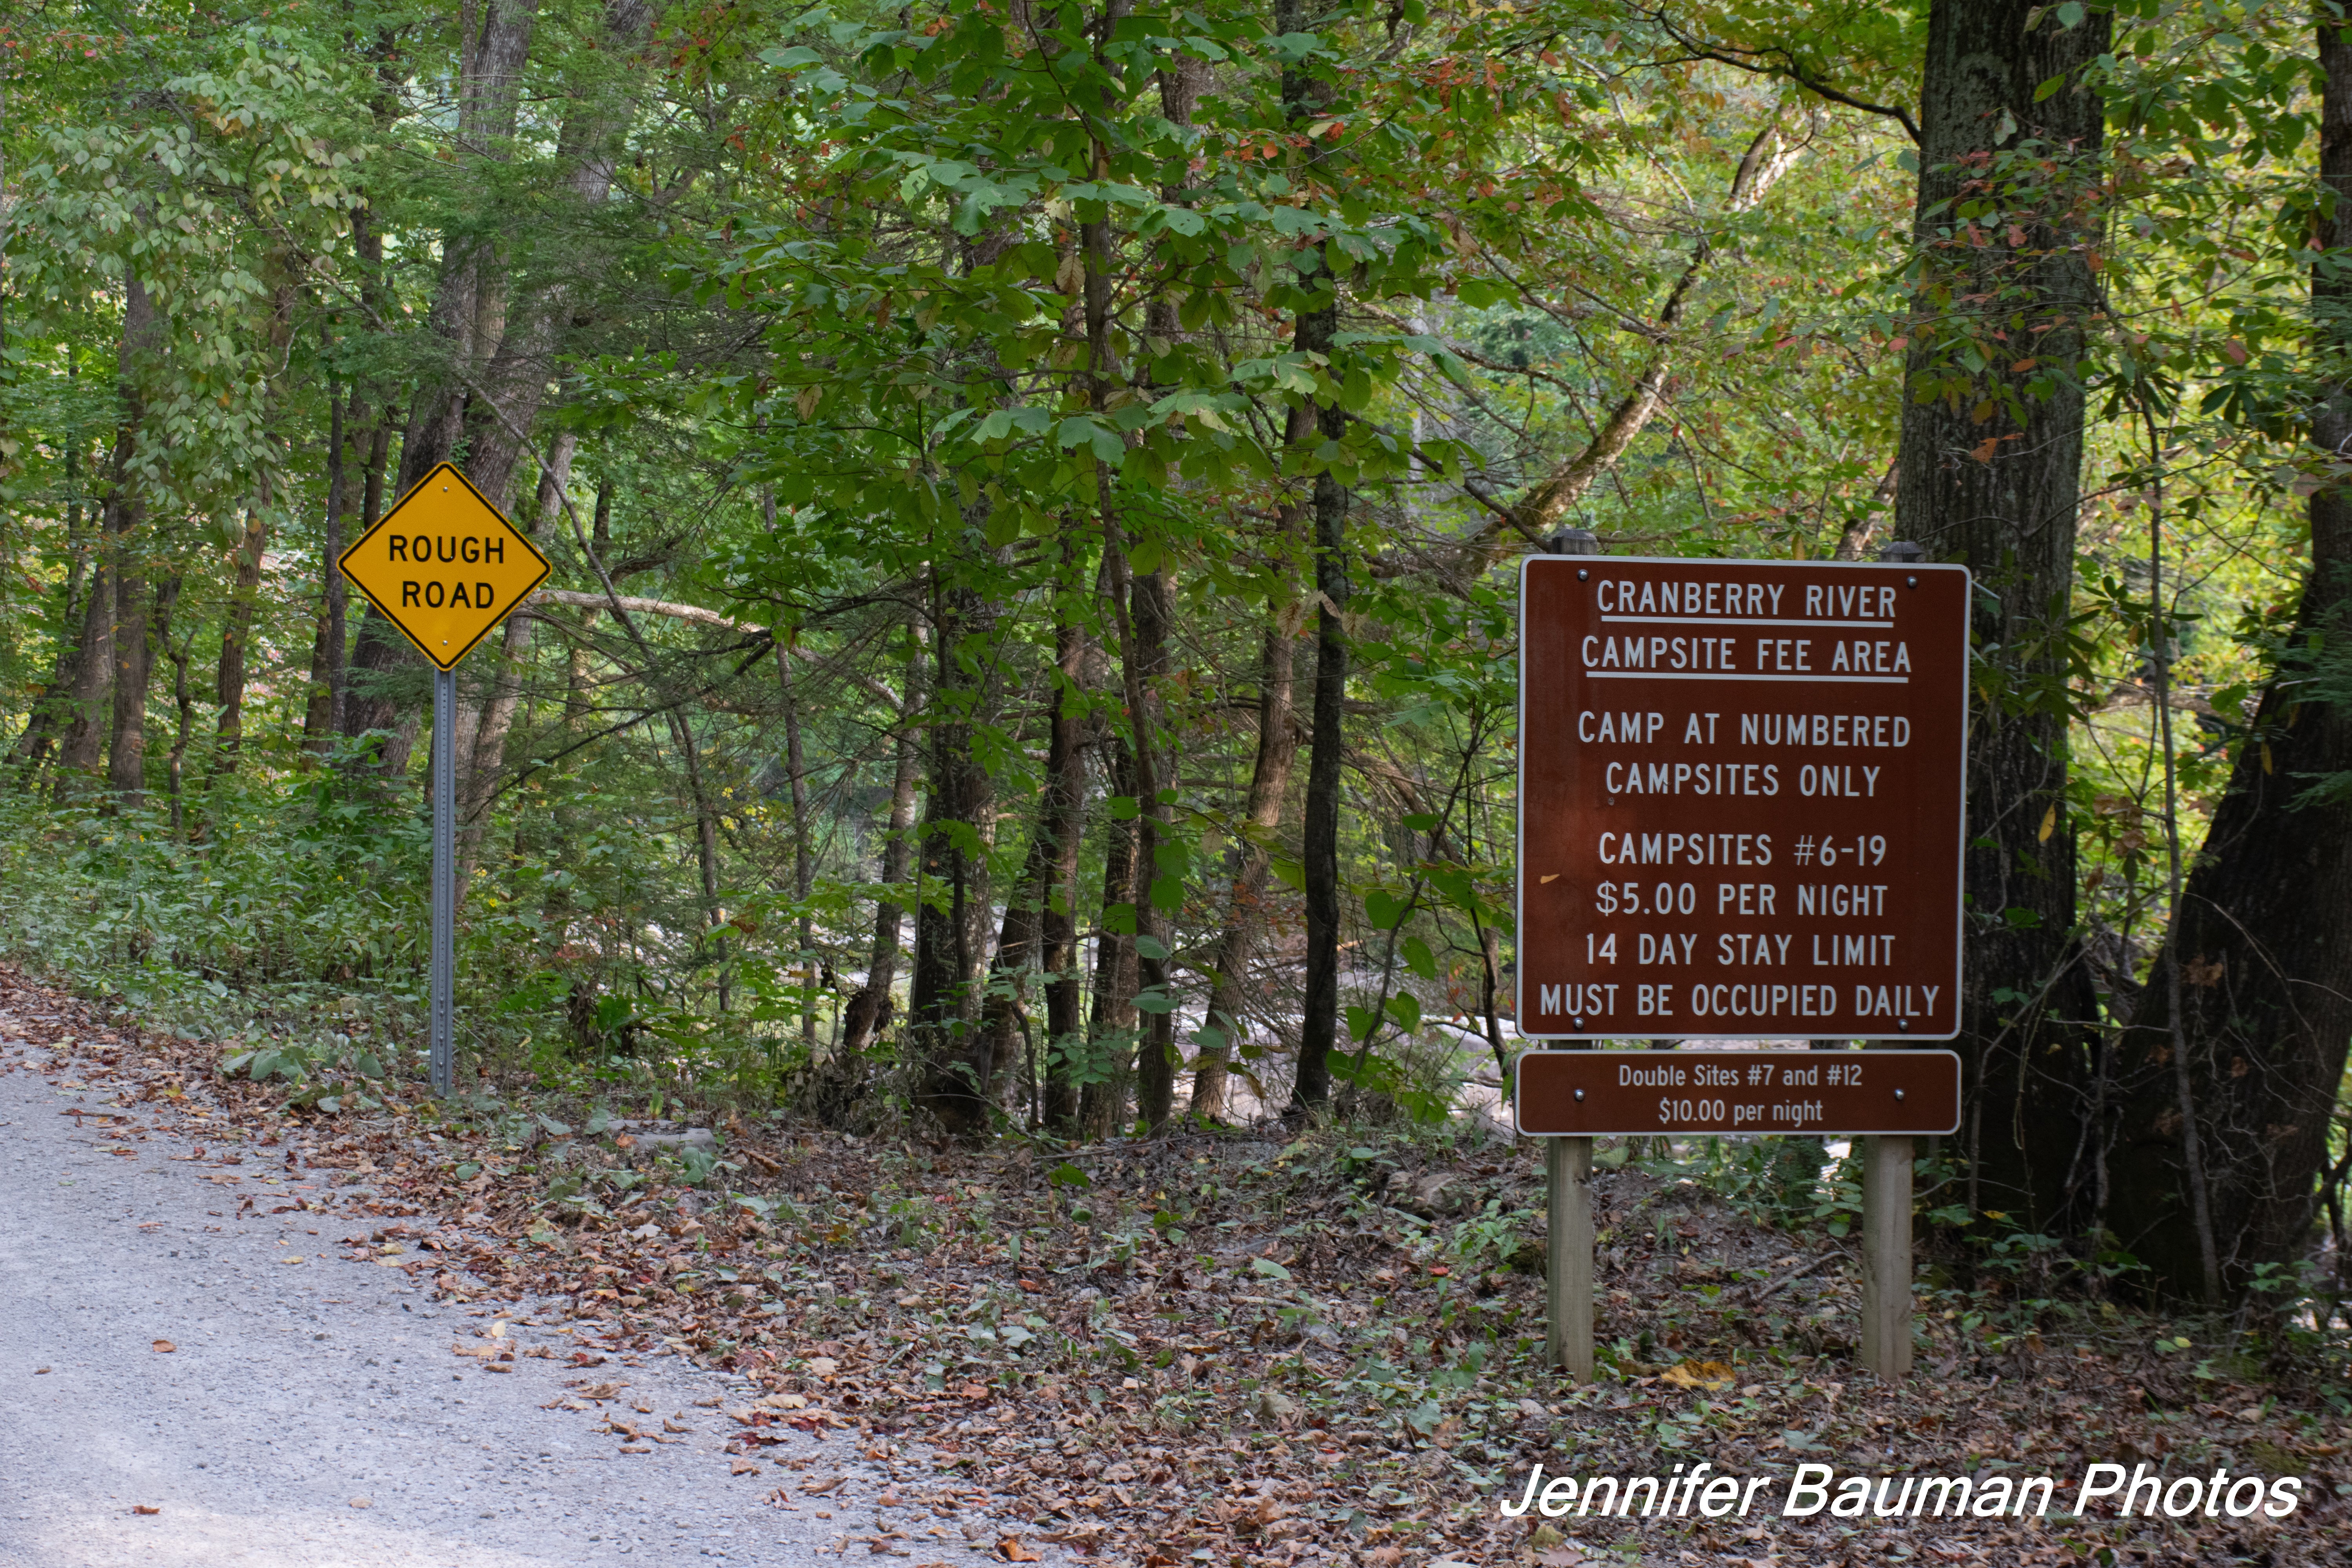 There are additional campsites along Forest Road 76